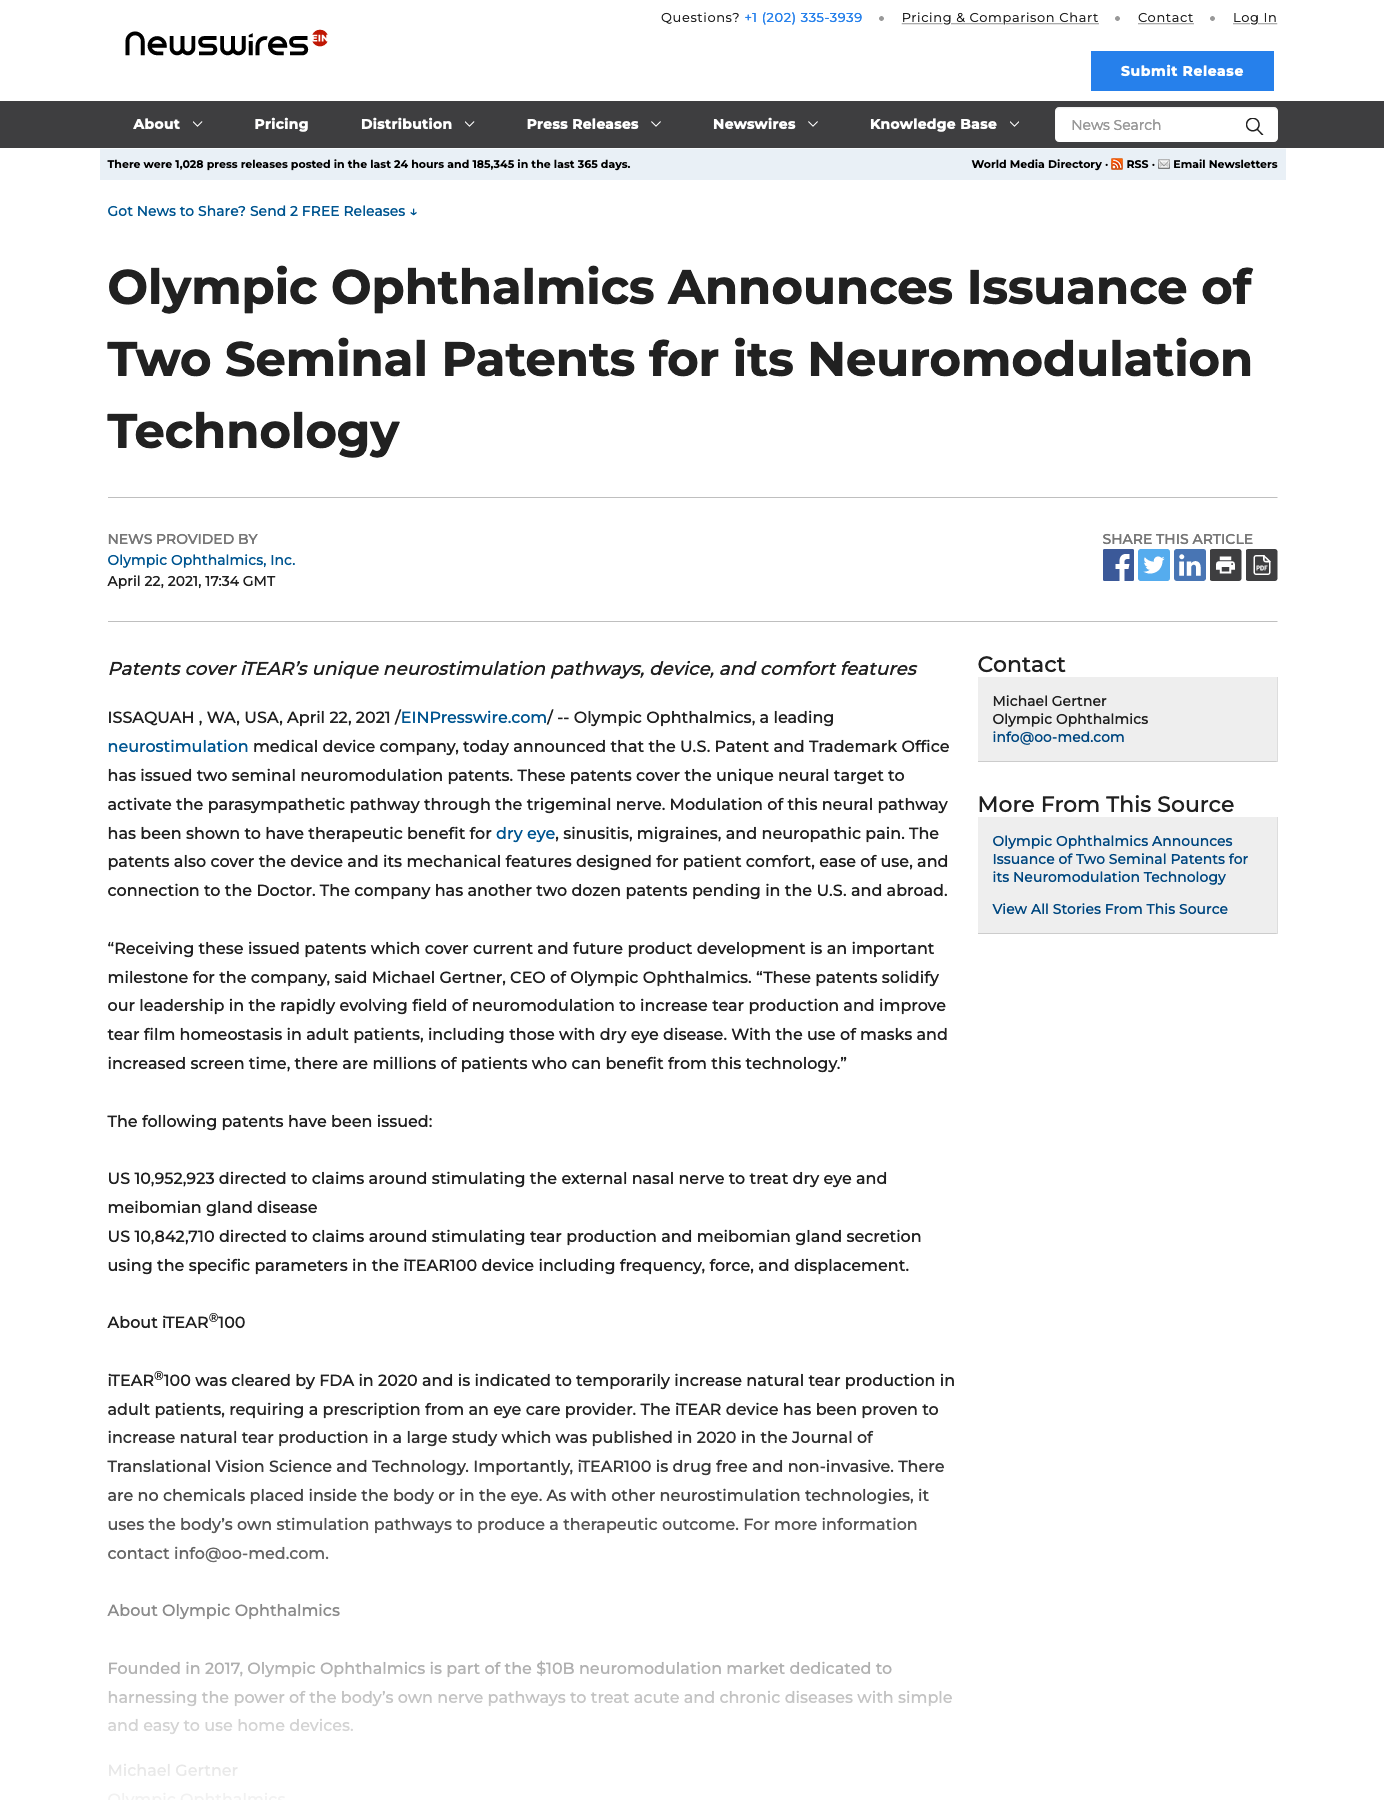 3-Olympic-Ophthalmics-Announces-Issuance-of-Two-Seminal-Patents-for-its-Neuromodulation-Technology-apr22-2021